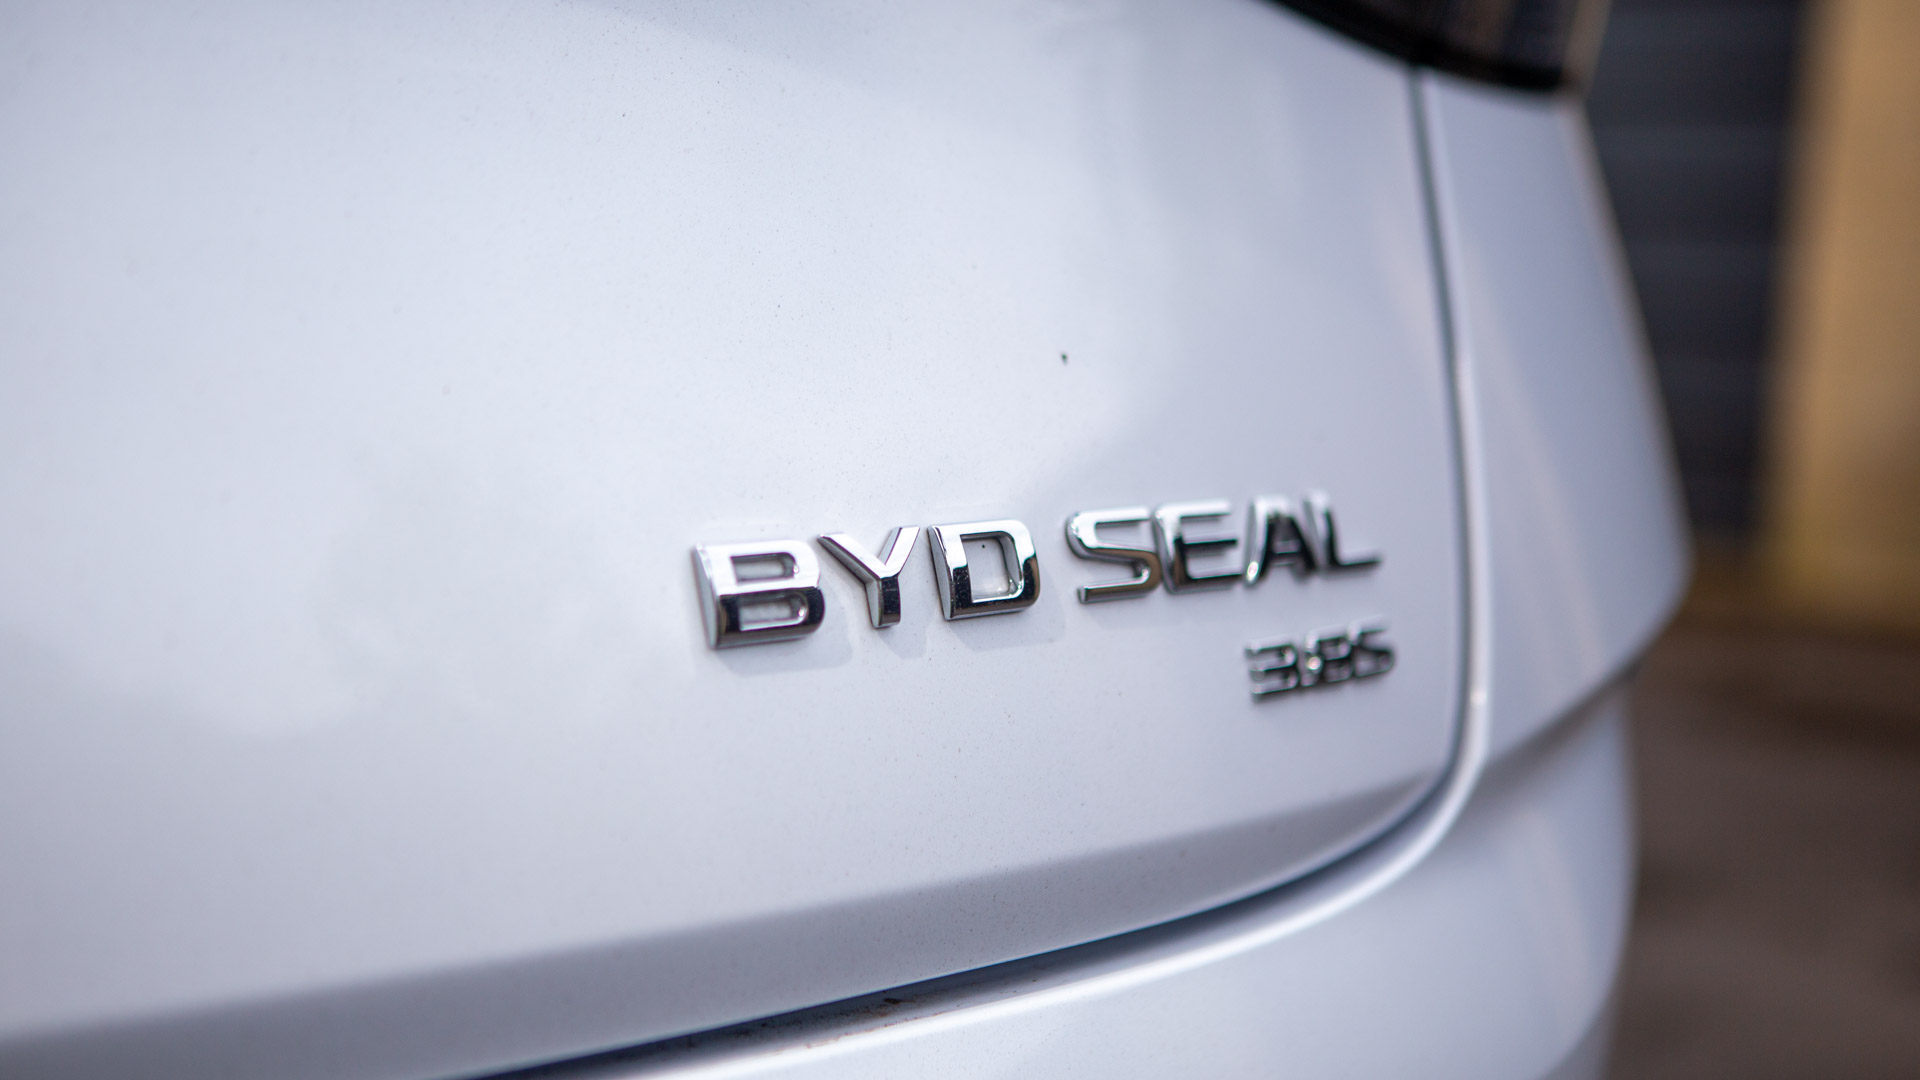 android, byd seal review: a tempting tesla rival